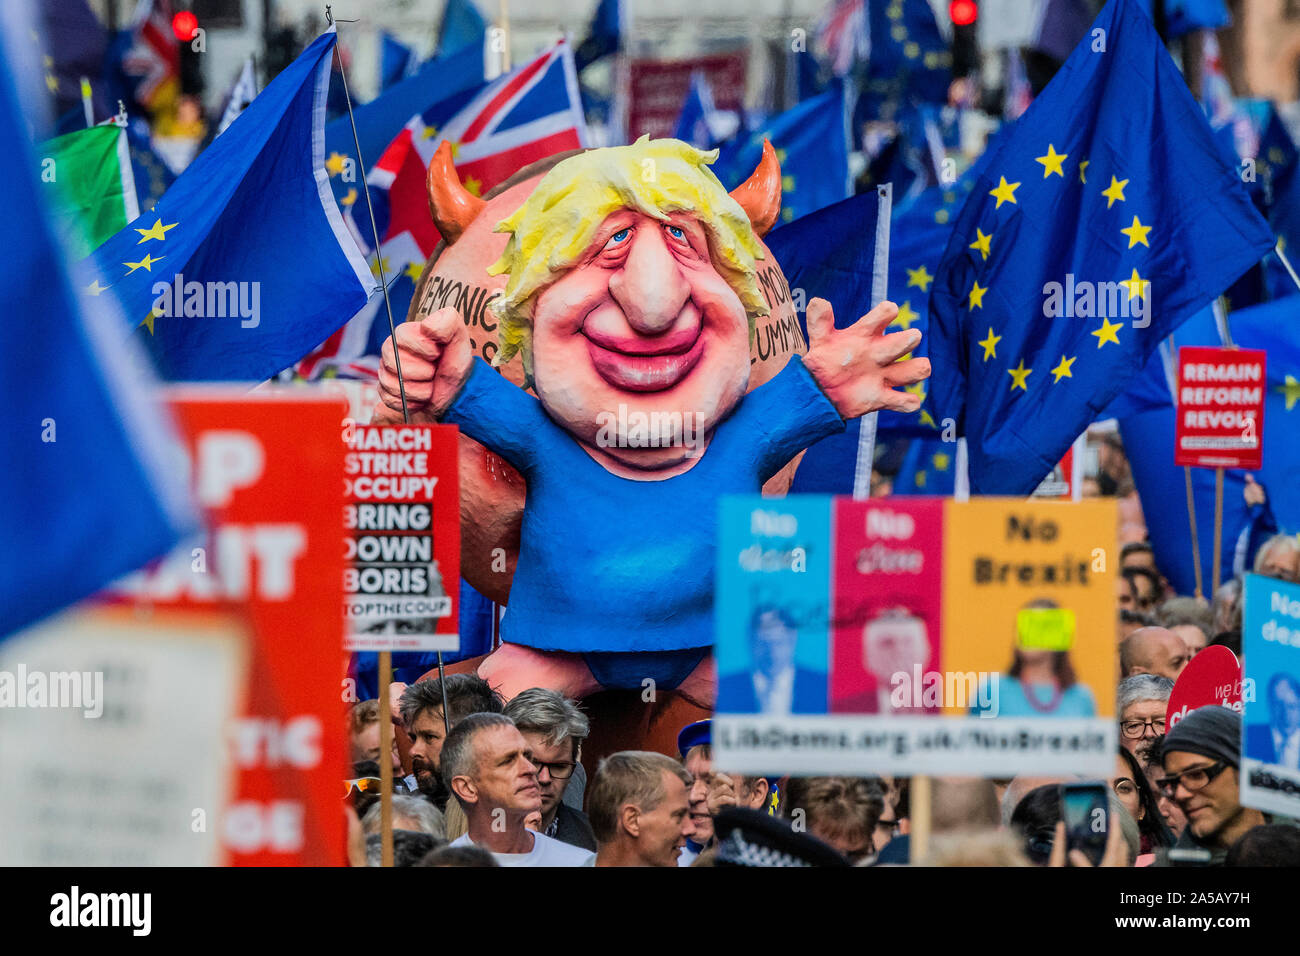 London, UK. 19th Oct, 2019. Effigies of Boris Johnson being operated like a puppet by Dominic Cummings - Stop Brexit, people's vote march from the west end to Westminster. Credit: Guy Bell/Alamy Live News Stock Photo